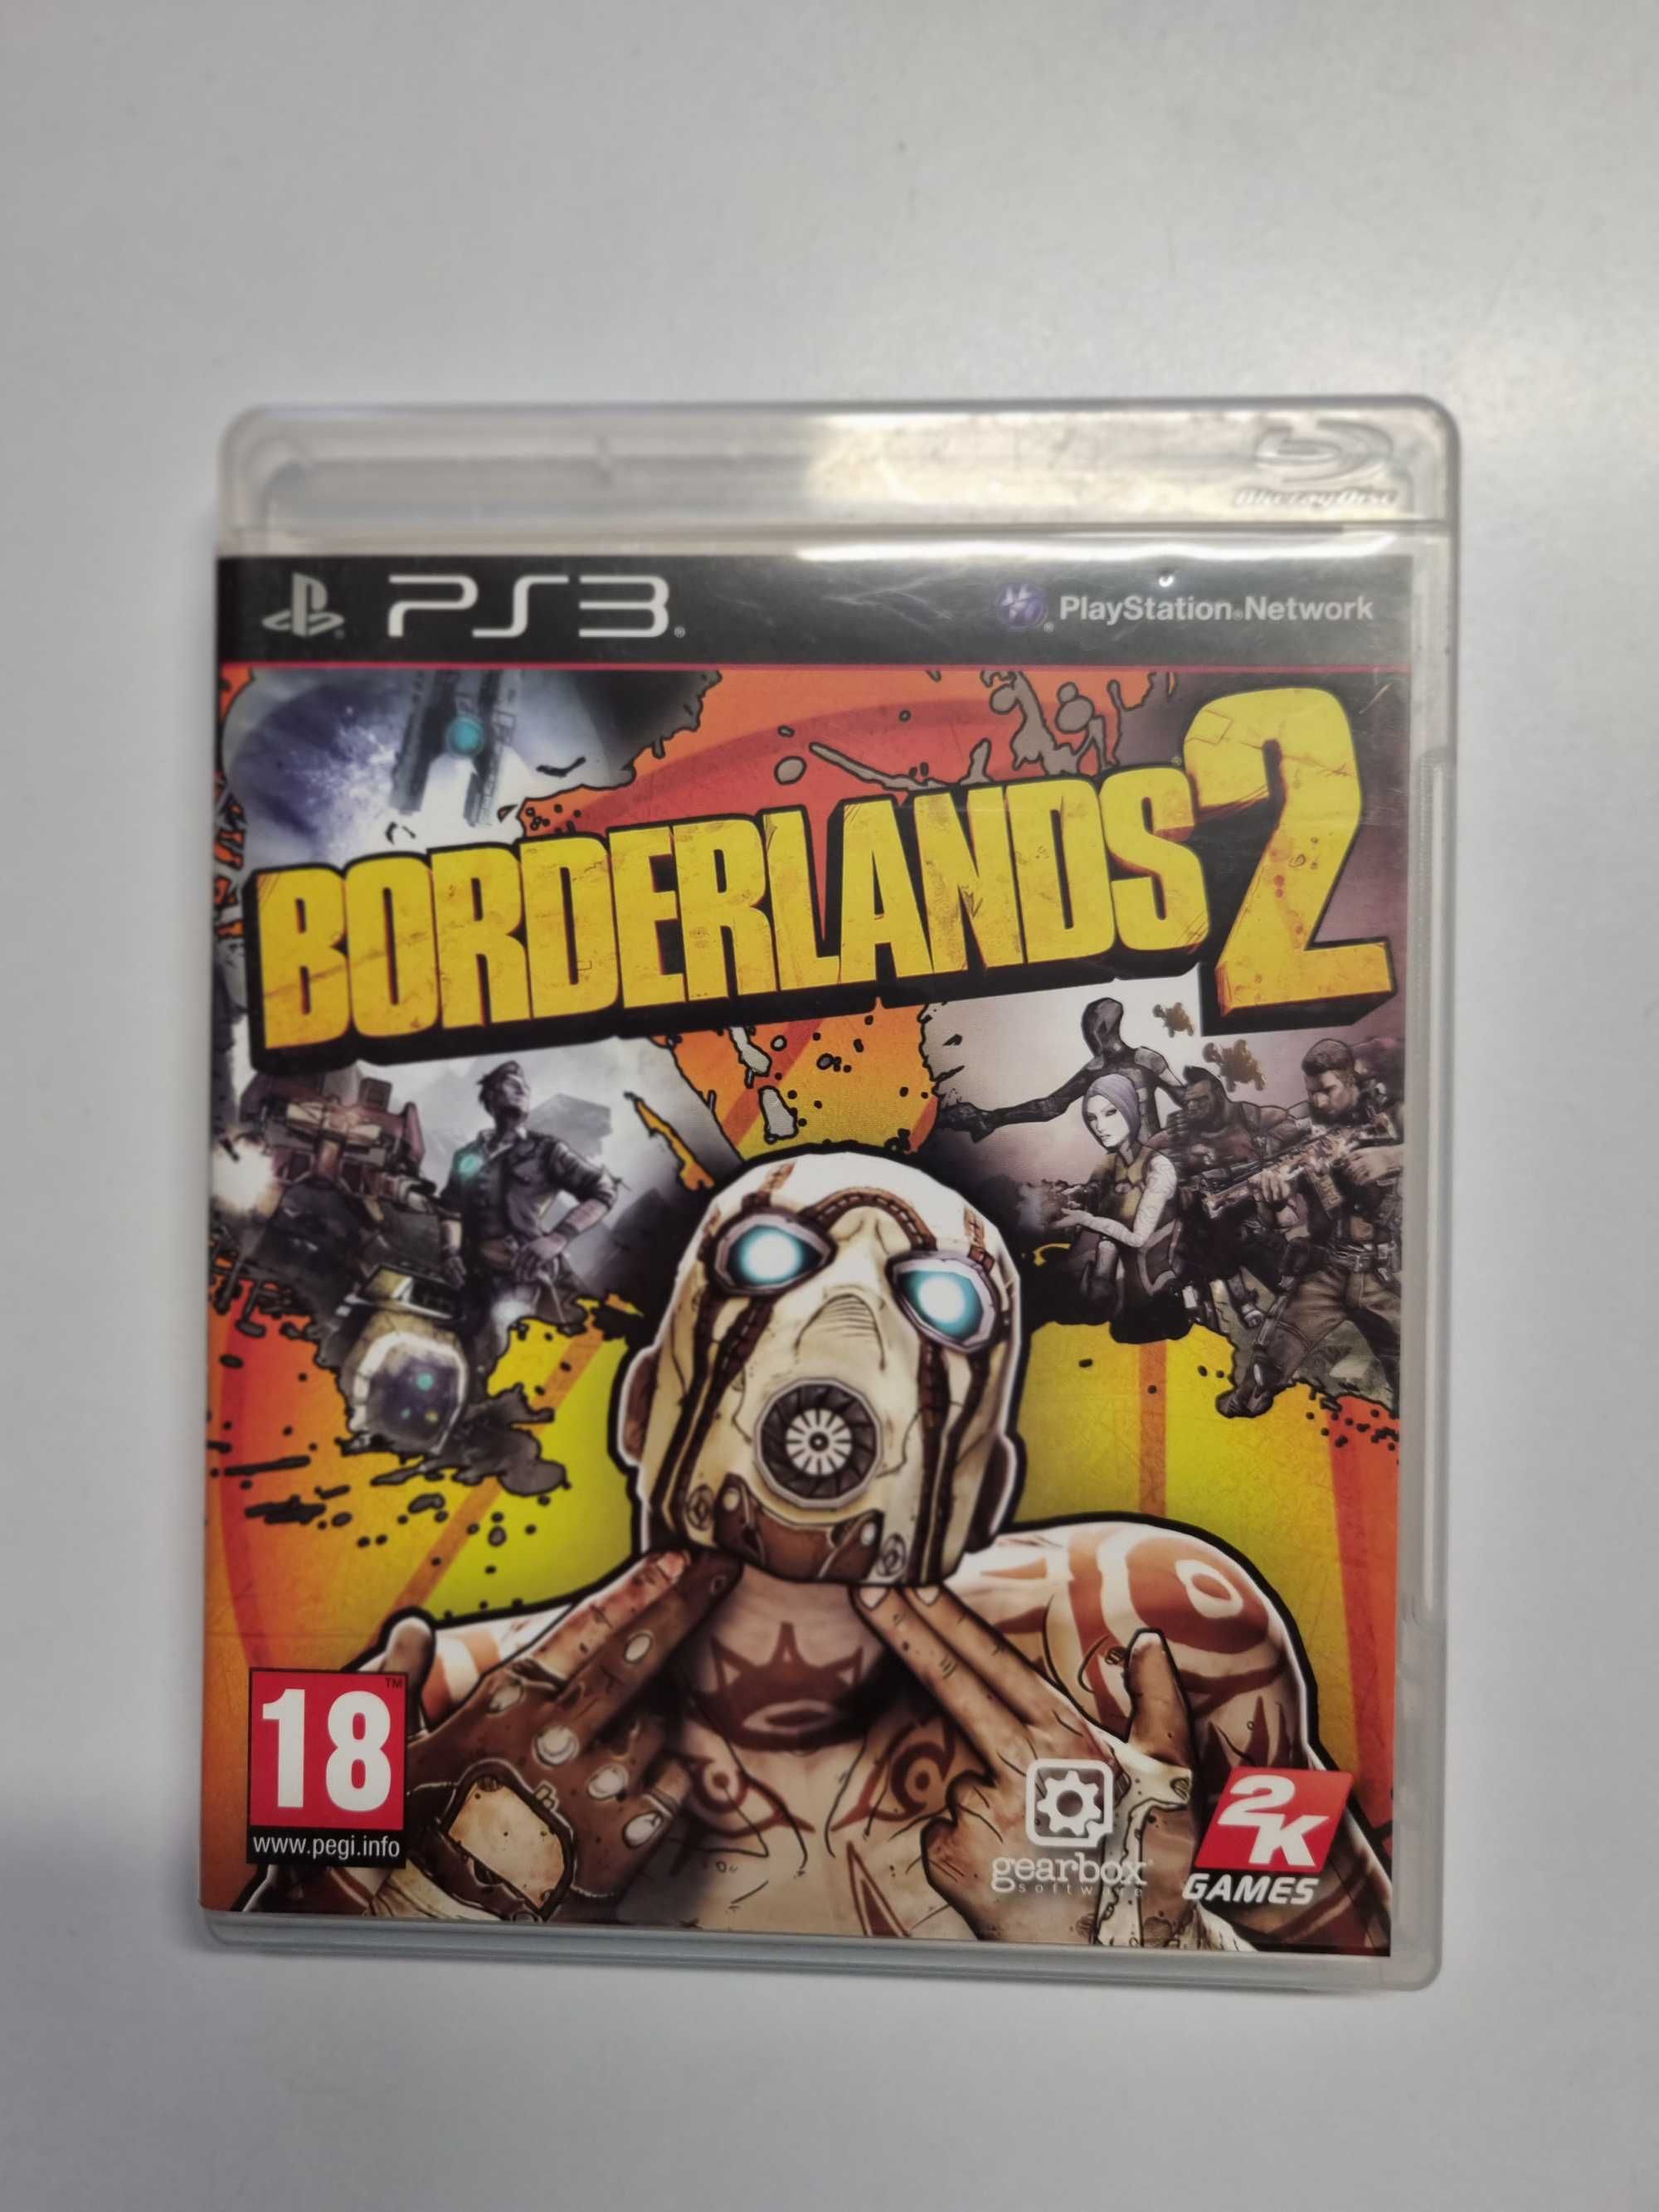 Borderlands 2 PS3 - As Game & GSM